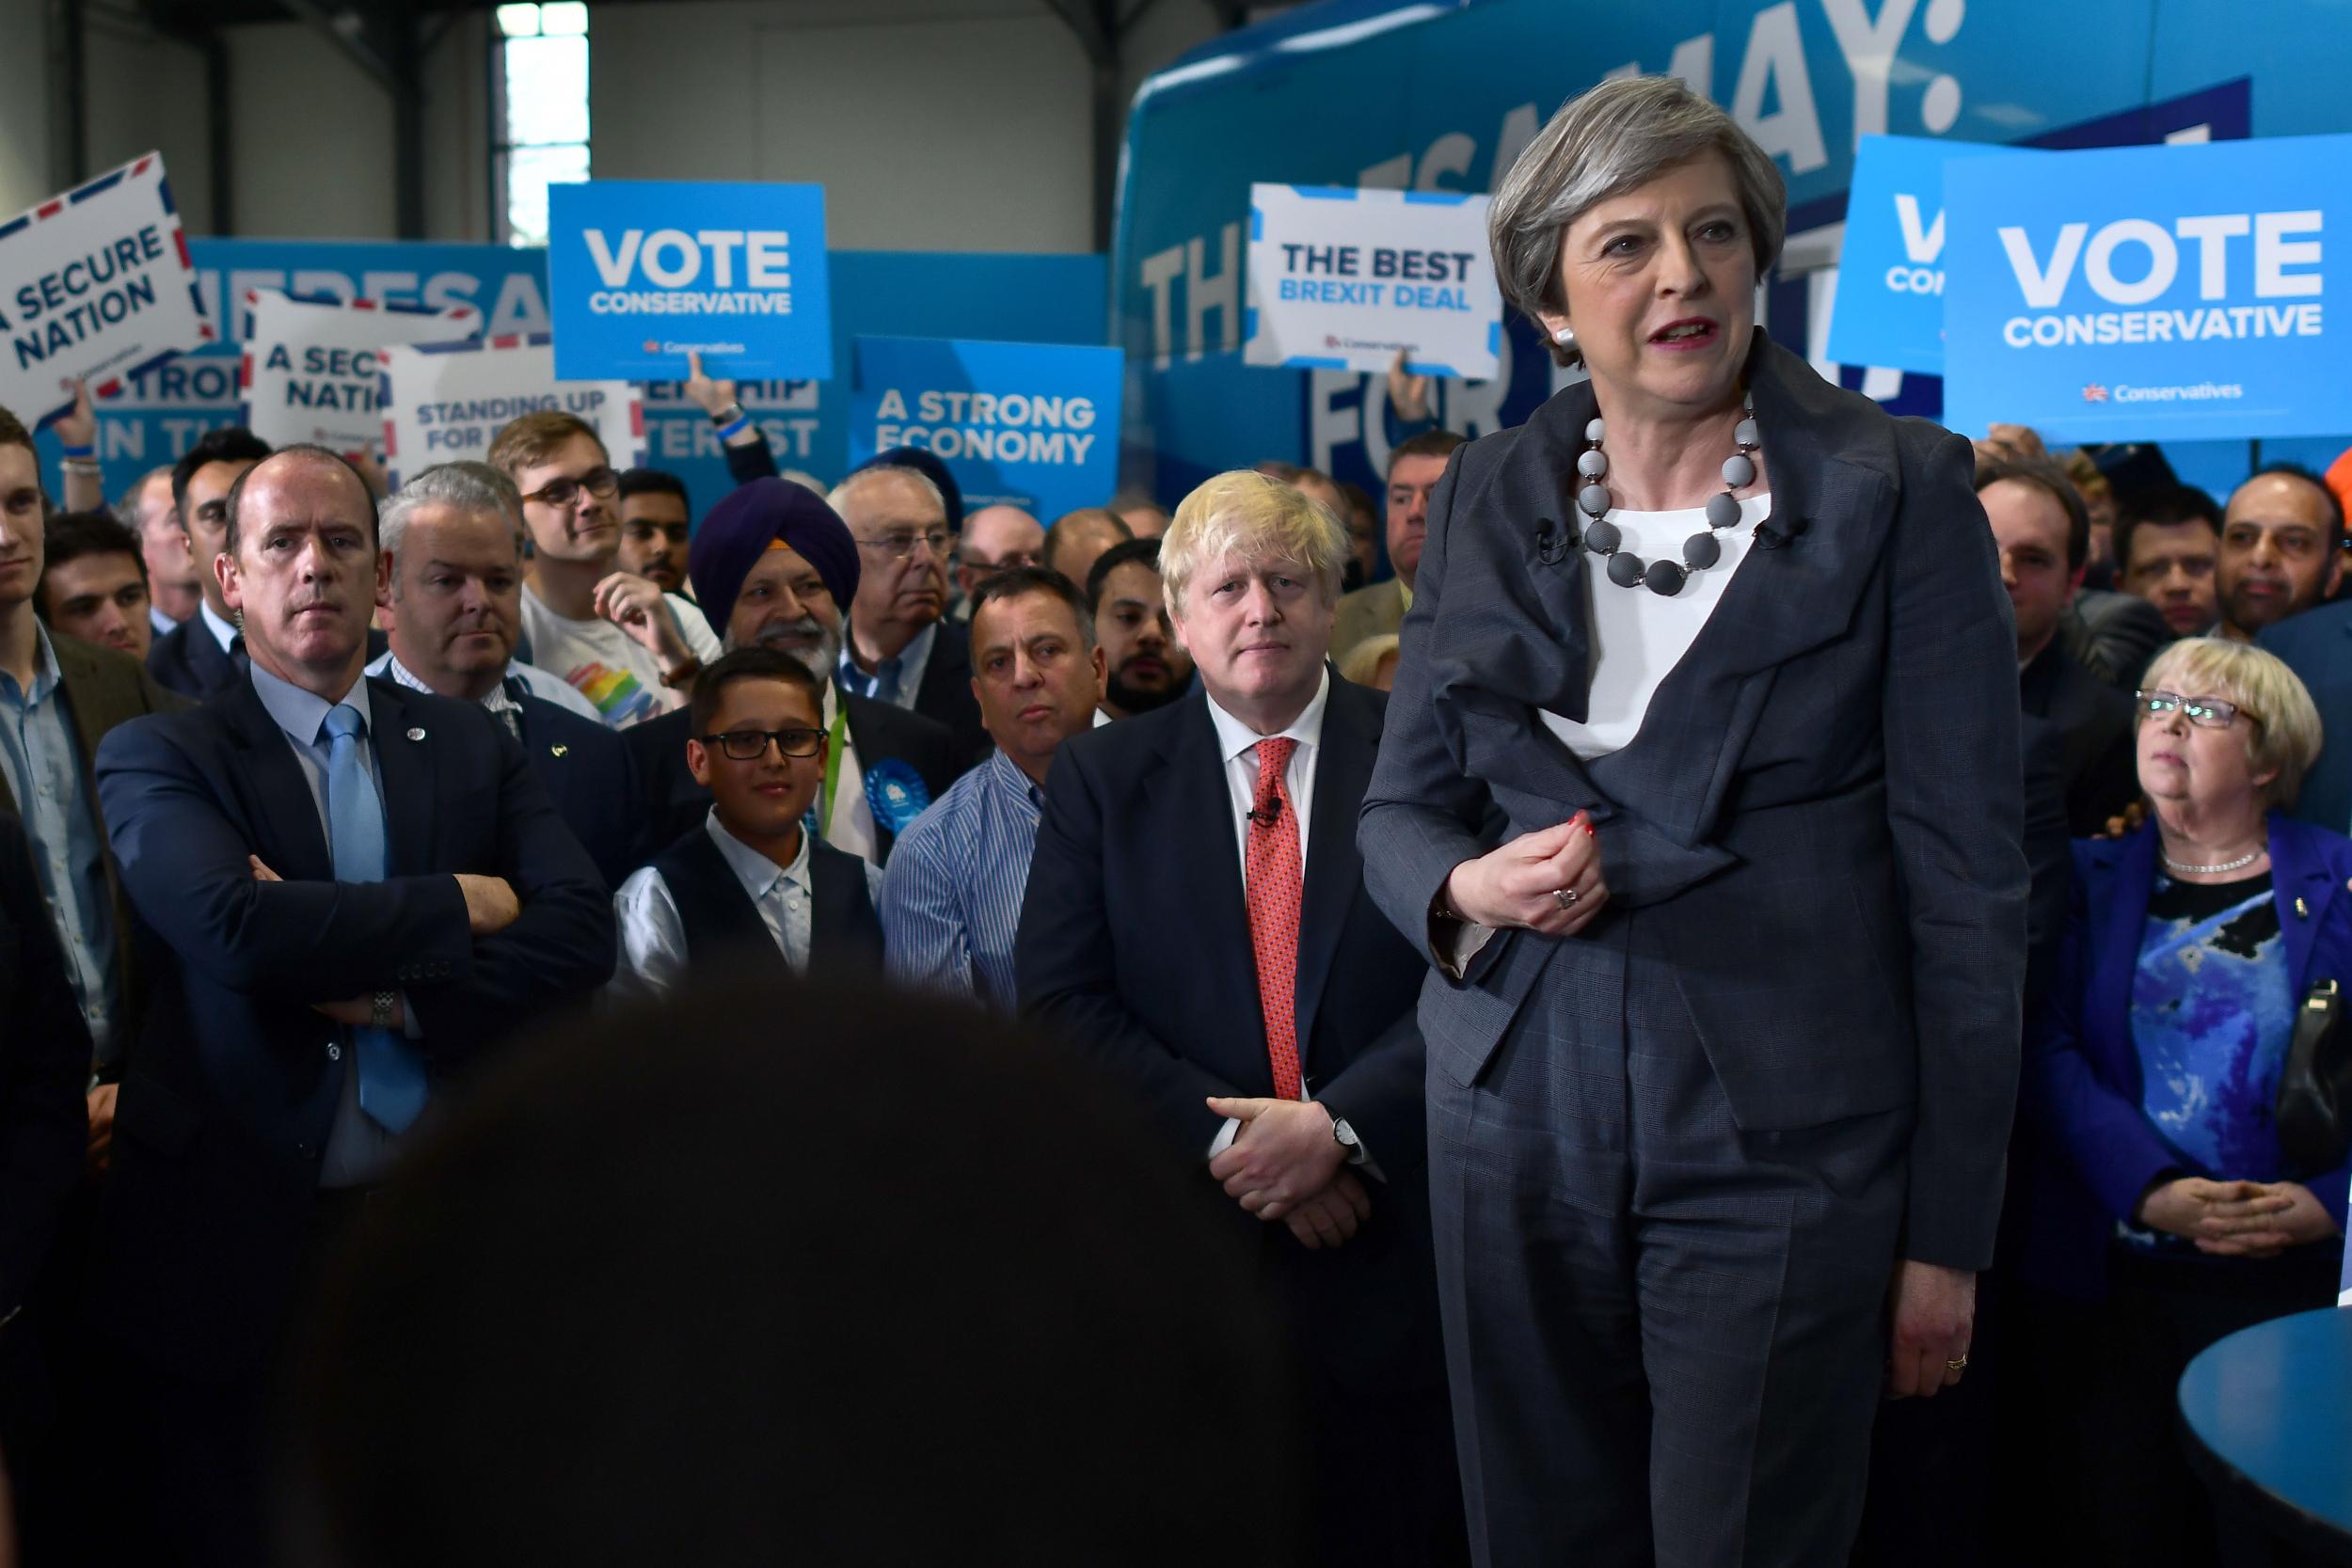 Boris Johnson and Theresa May at a Conservative campaign event on 6 June